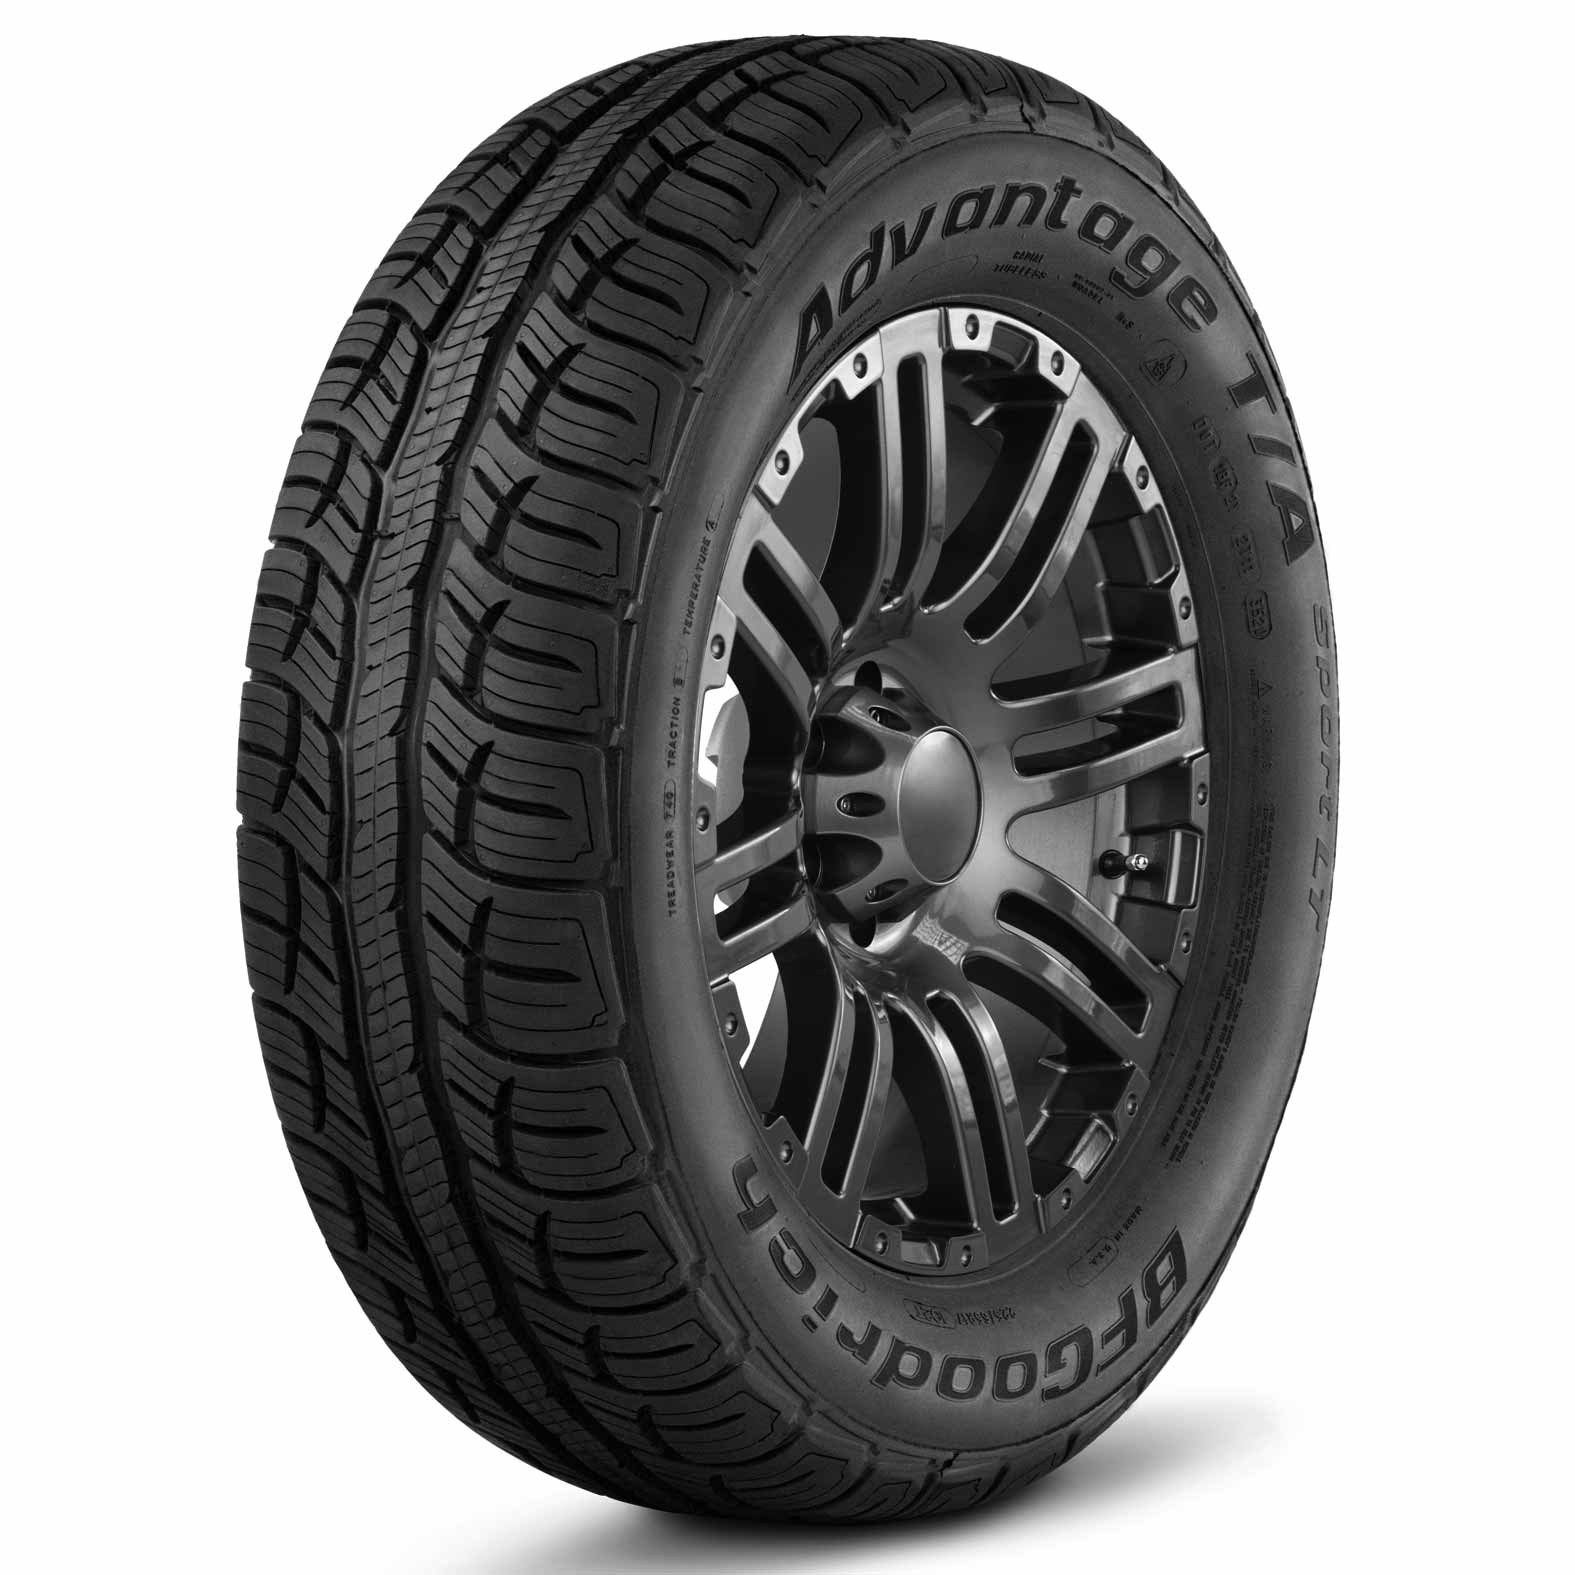 bfgoodrich-advantage-t-a-sport-lt-tires-for-all-weather-kal-tire